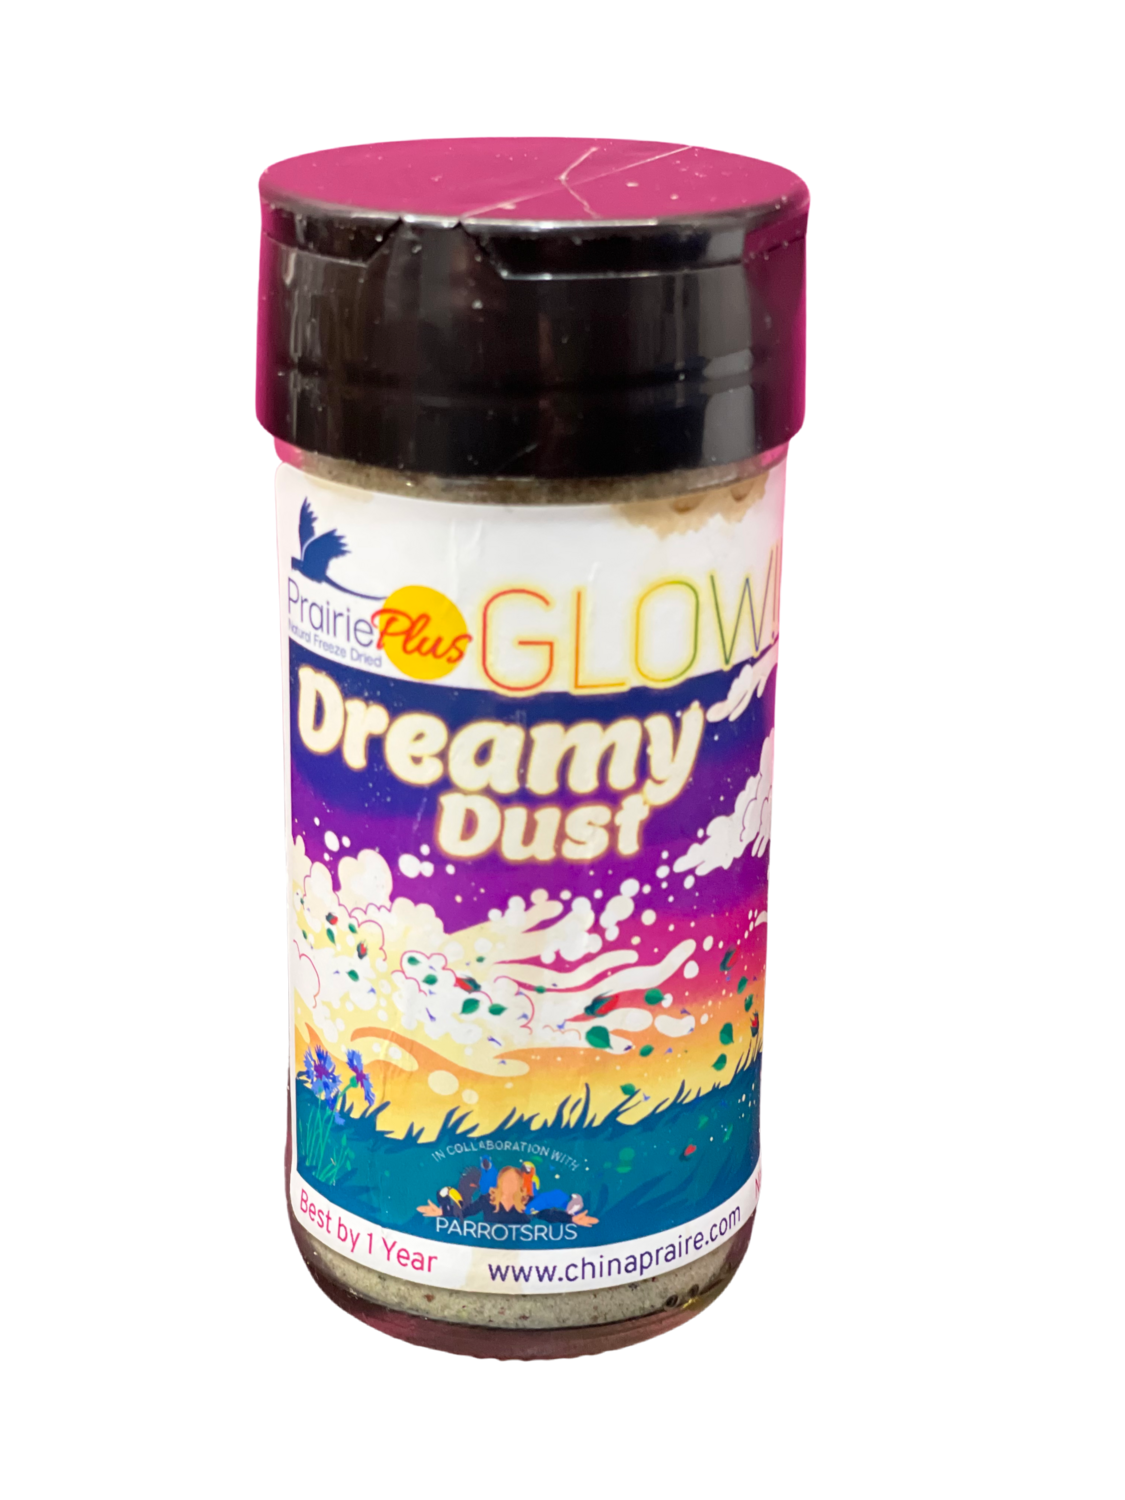 NEW! Dreamy Dust Glow Up! - Whole Food Supplement - 1oz in refillable glass jar. Sprinkle dust over moist or dry food for additional nutrients and diversity. Ingredients: Freeze Dried Cauliflower, FD